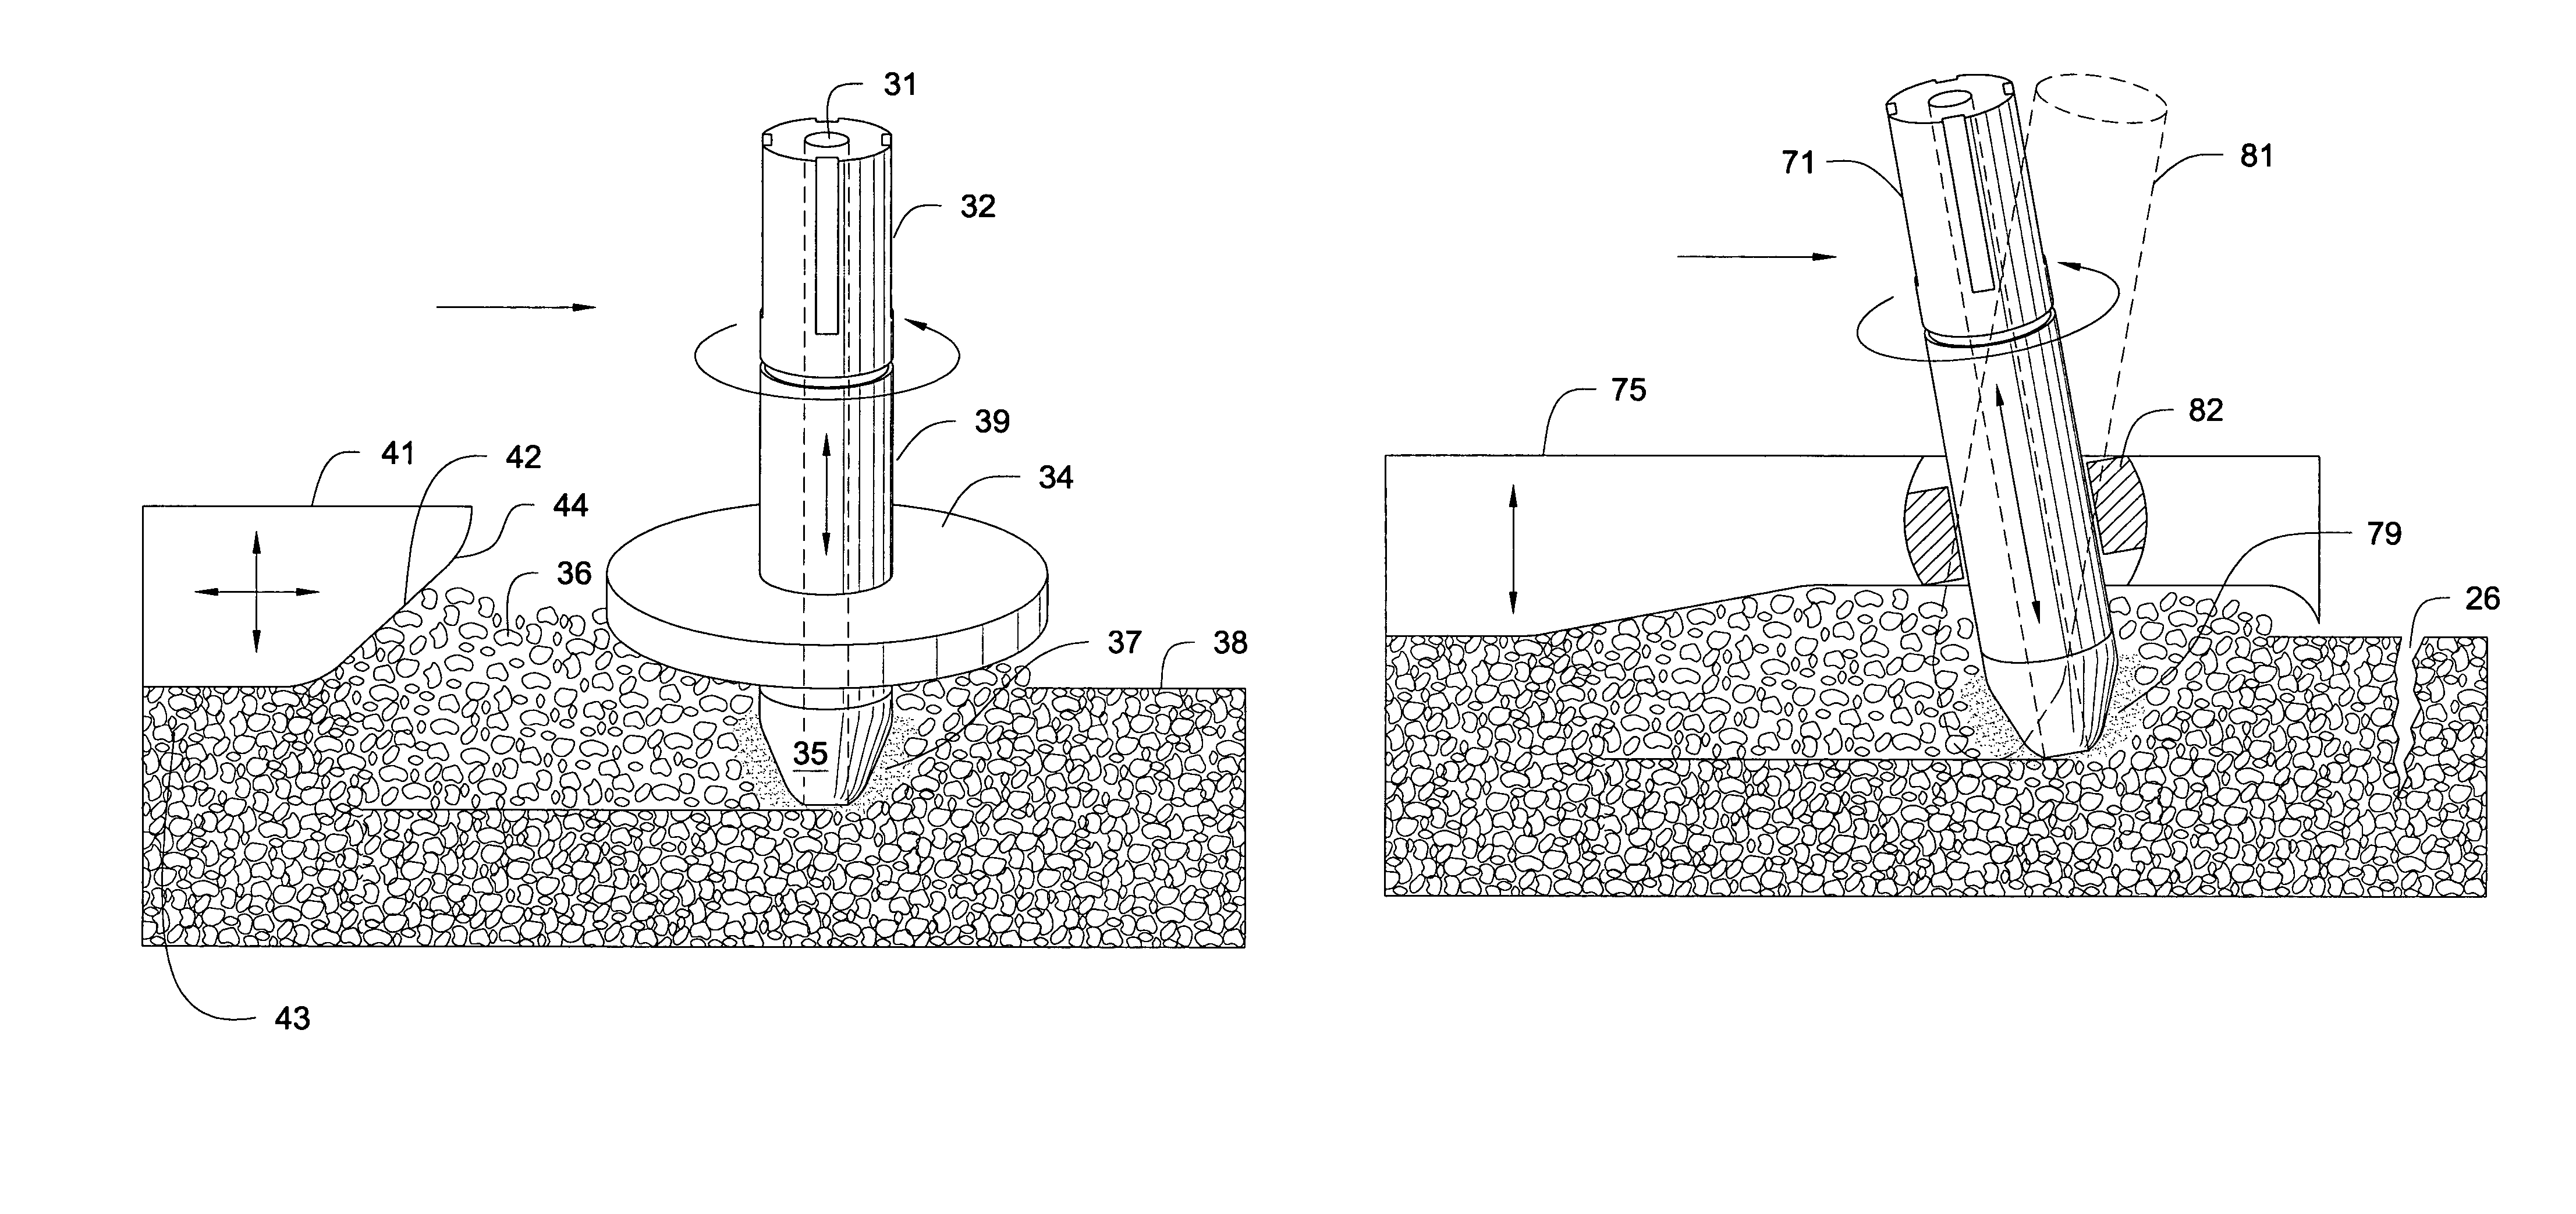 Apparatus and method for working asphalt pavement